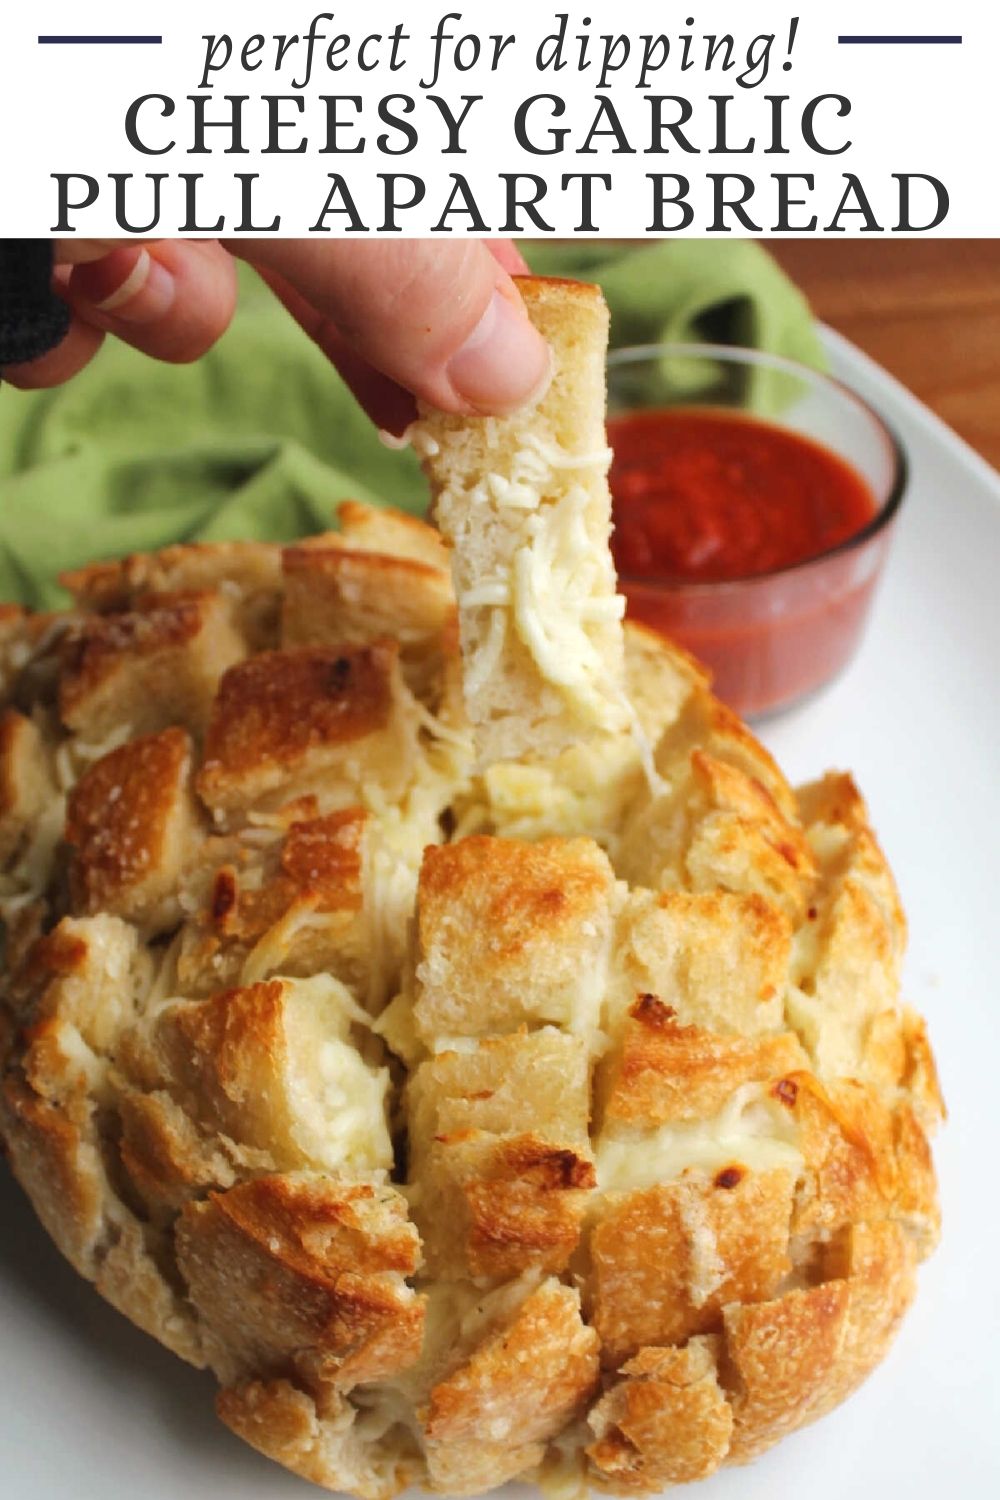 Cheesy garlic pull apart bread is like the best garlic bread you've ever had. You can pull cheesy chunks of bread out of a sourdough loaf and dip them in marinara for a fun snack, appetizer or side dish to your favorite pasta meal.